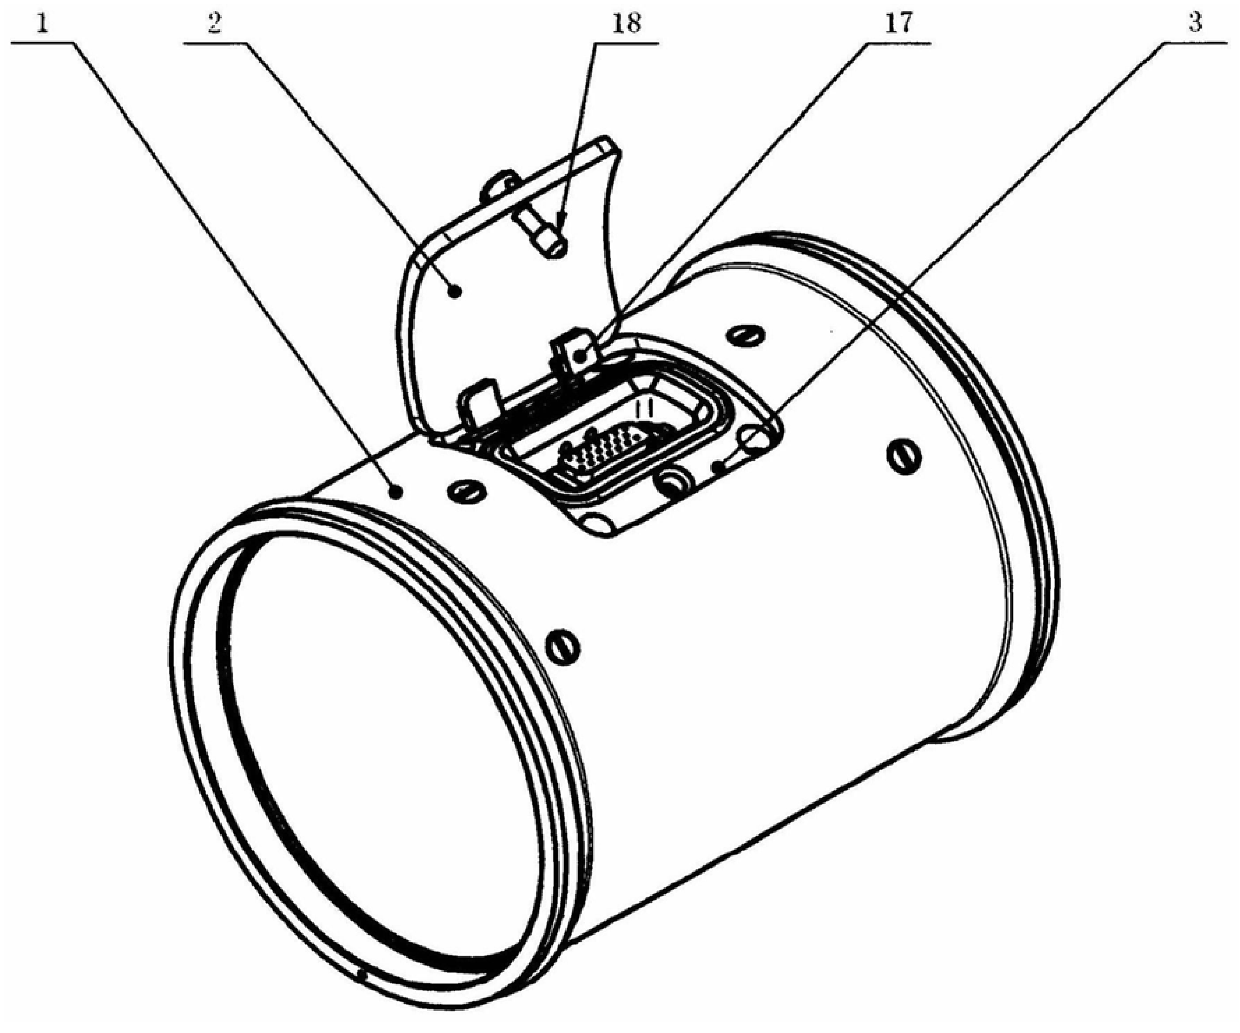 Hatch structure of a missile recording compartment